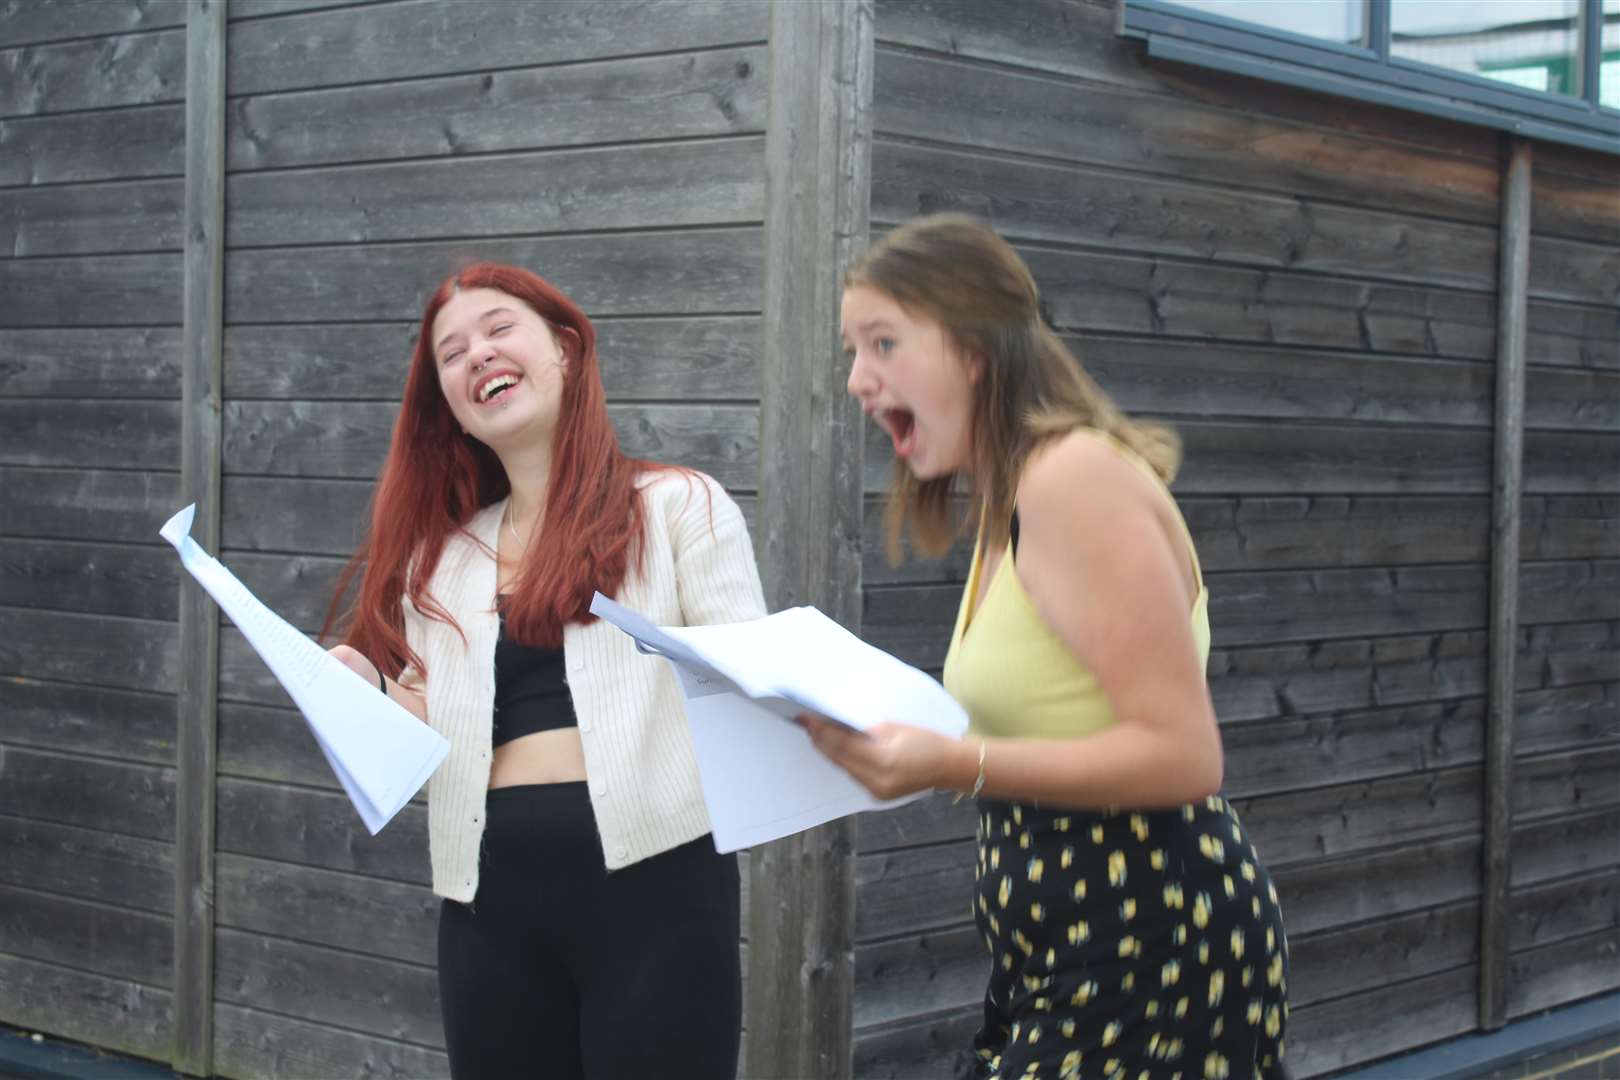 Delight as pupils at Highsted Grammar School for Girls learn their GCSE results at the Sittingbourne school (50185814)